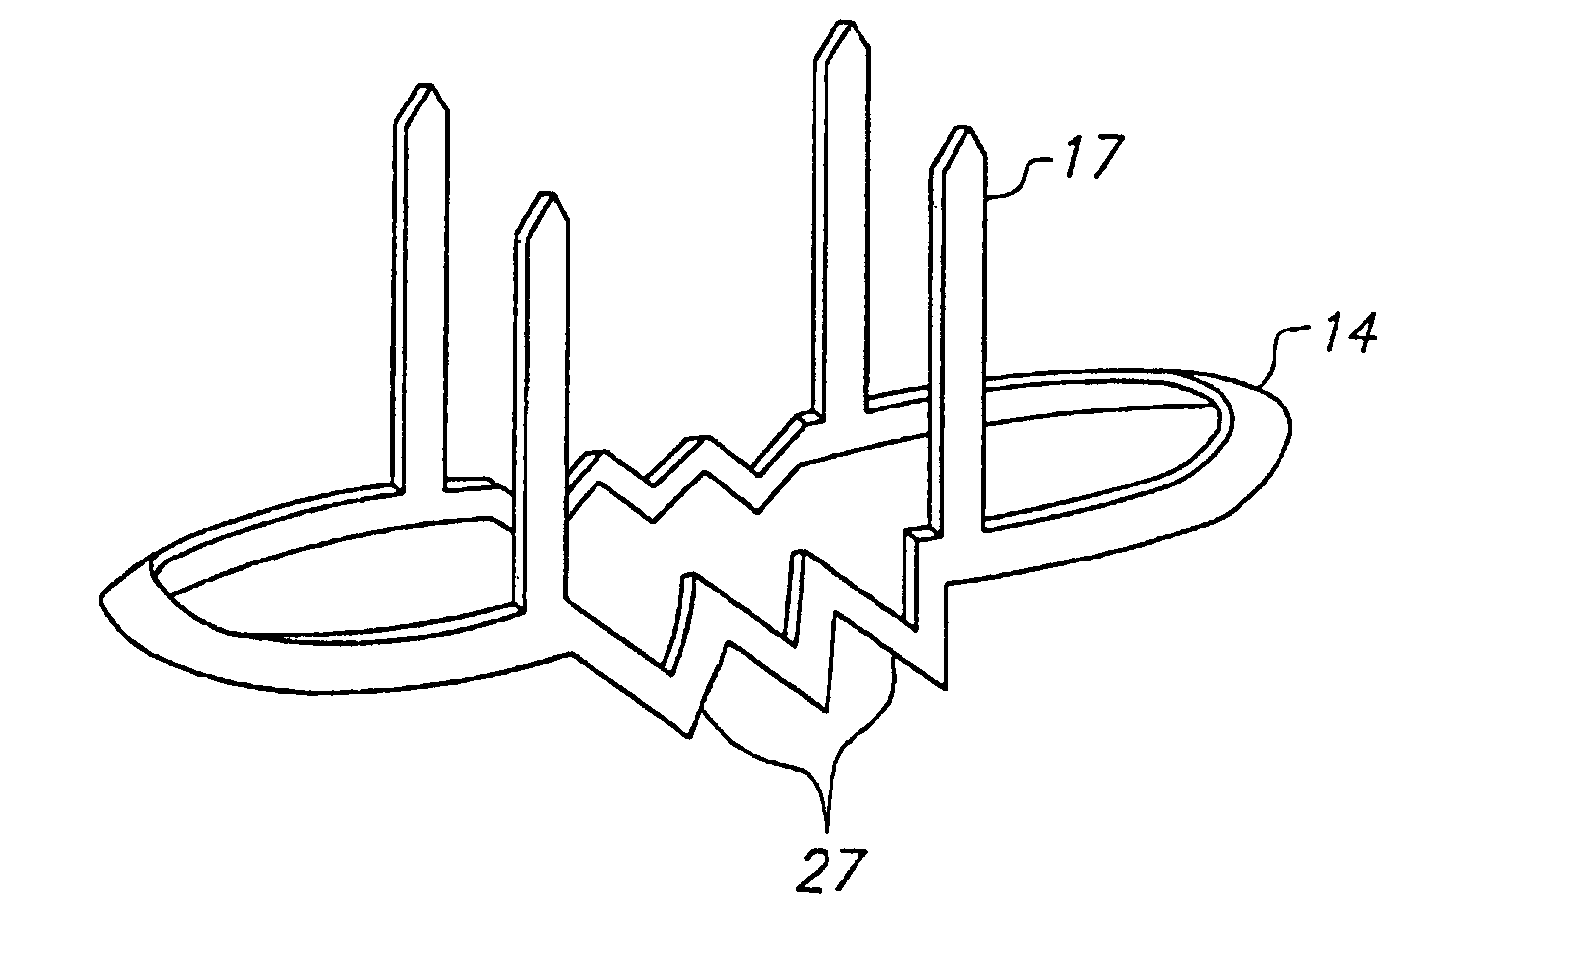 Method and system for attaching a graft to a blood vessel